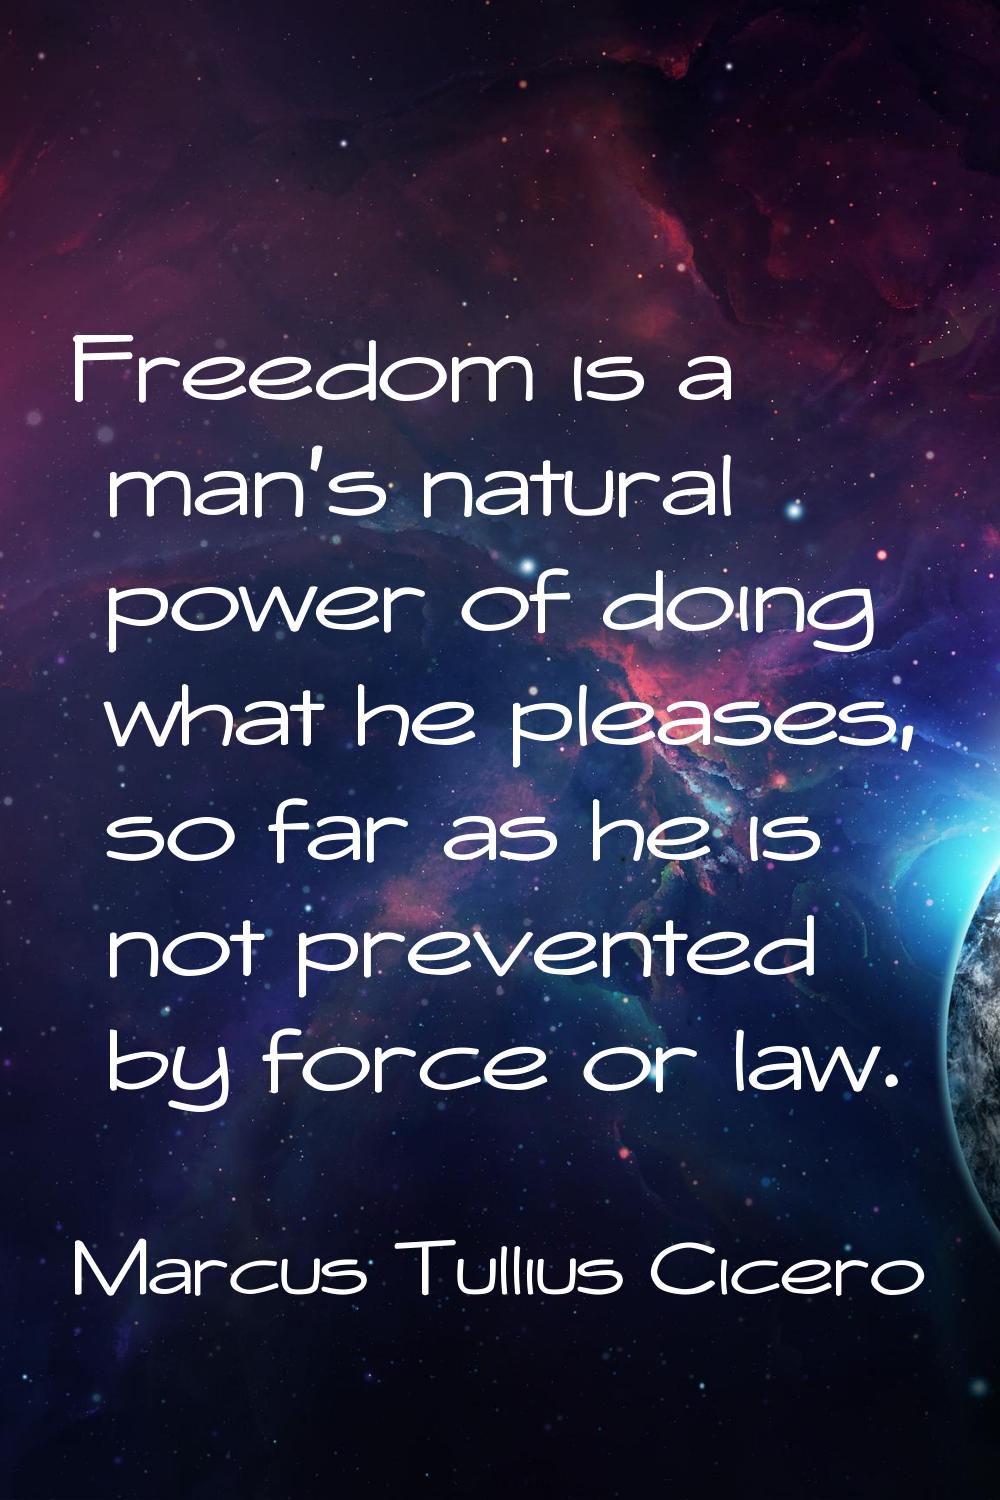 Freedom is a man's natural power of doing what he pleases, so far as he is not prevented by force o